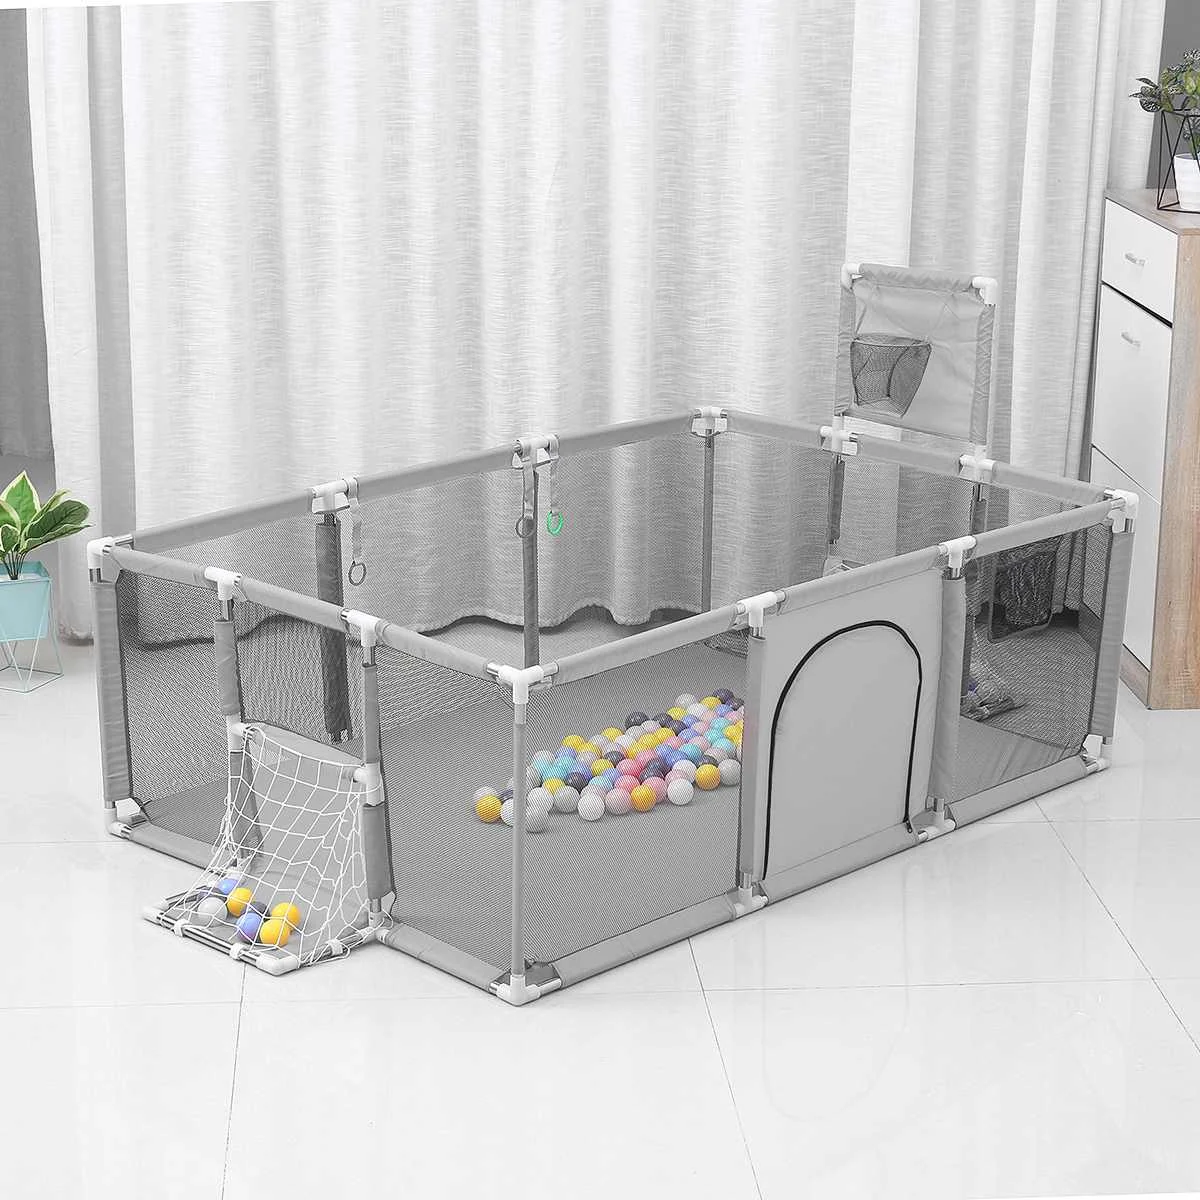 12 Panels Baby playpen for baby and toddlers Mat Interactive Safety Gate Slide Toddler Fence Game